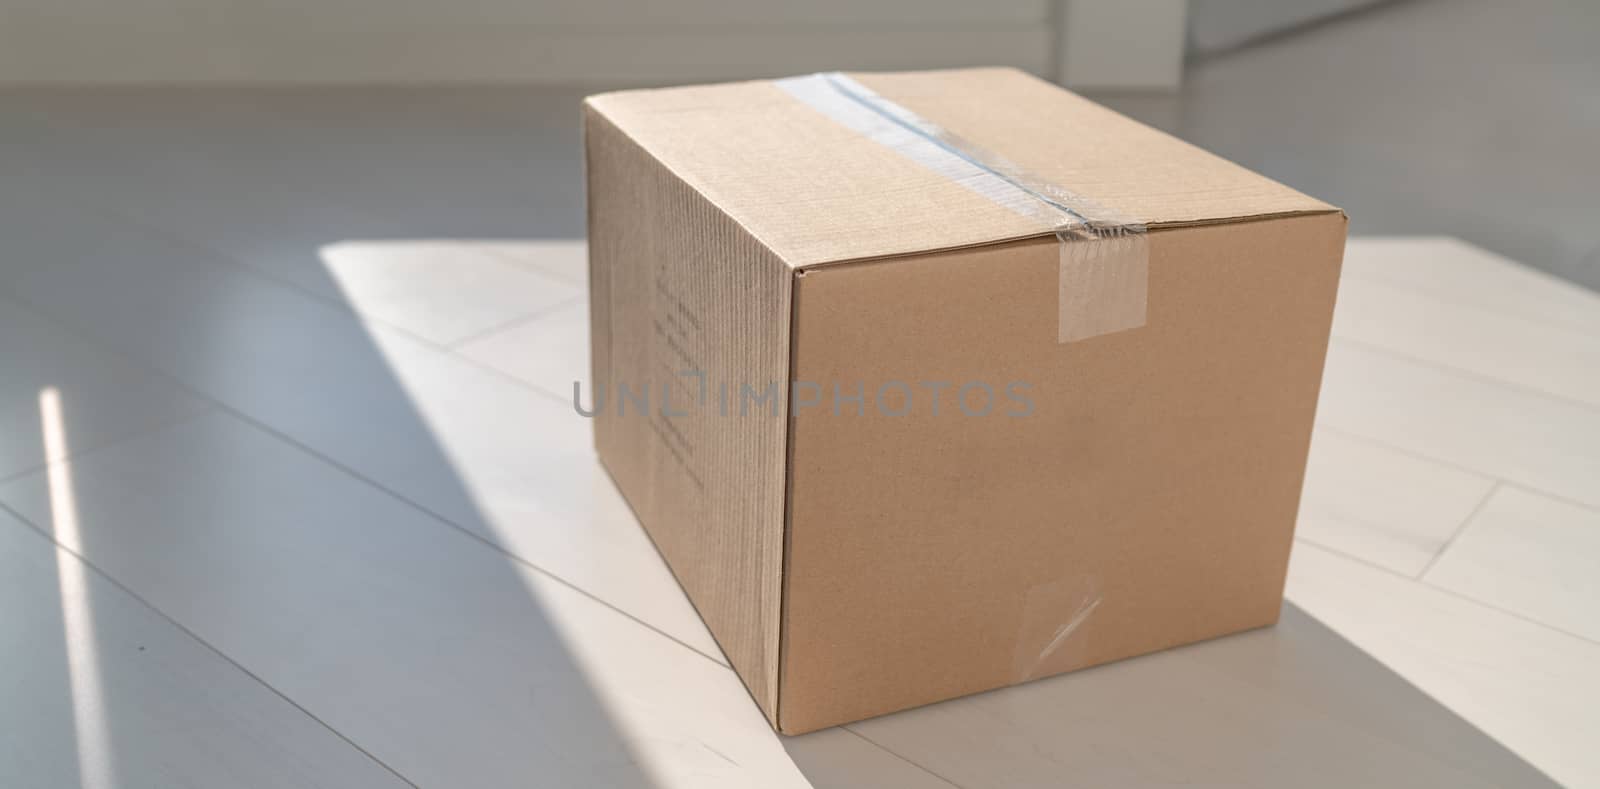 Home delivery cardboard box package delivered at doorstep on floor of entrance door. Parcel shipping for retail online shopping businesses by Maridav